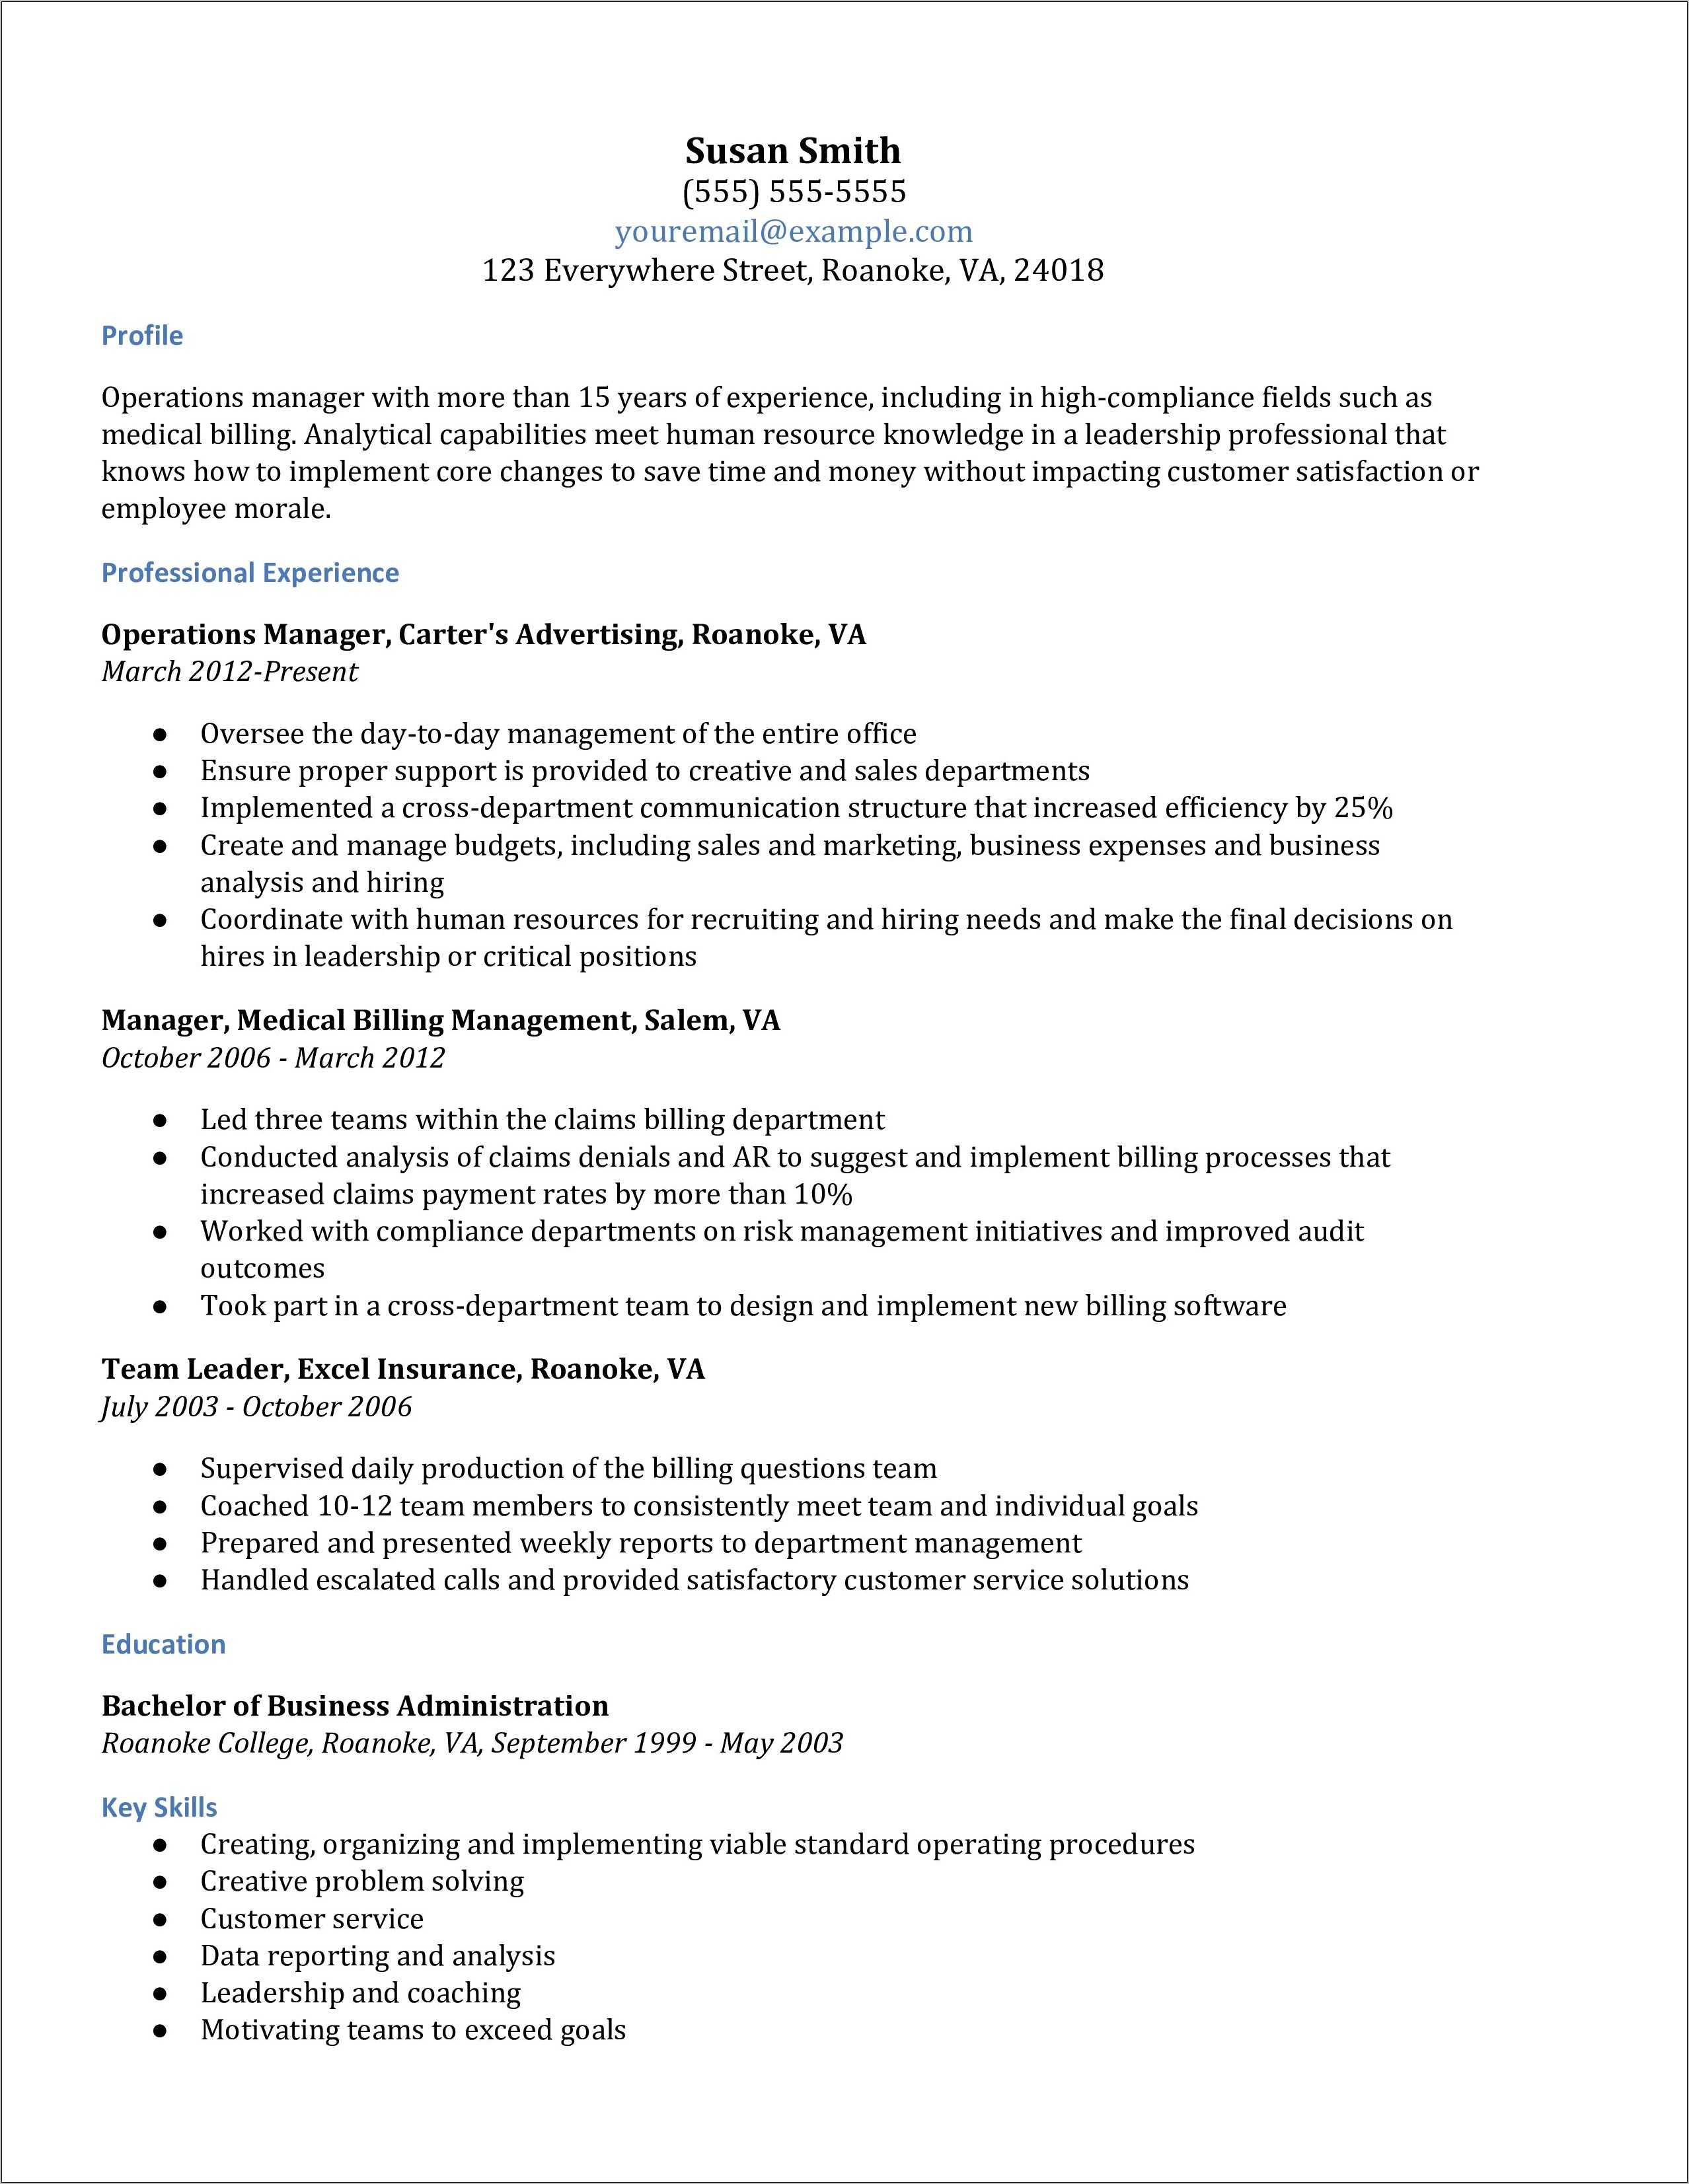 Resume Summary Examples For Operations Manager